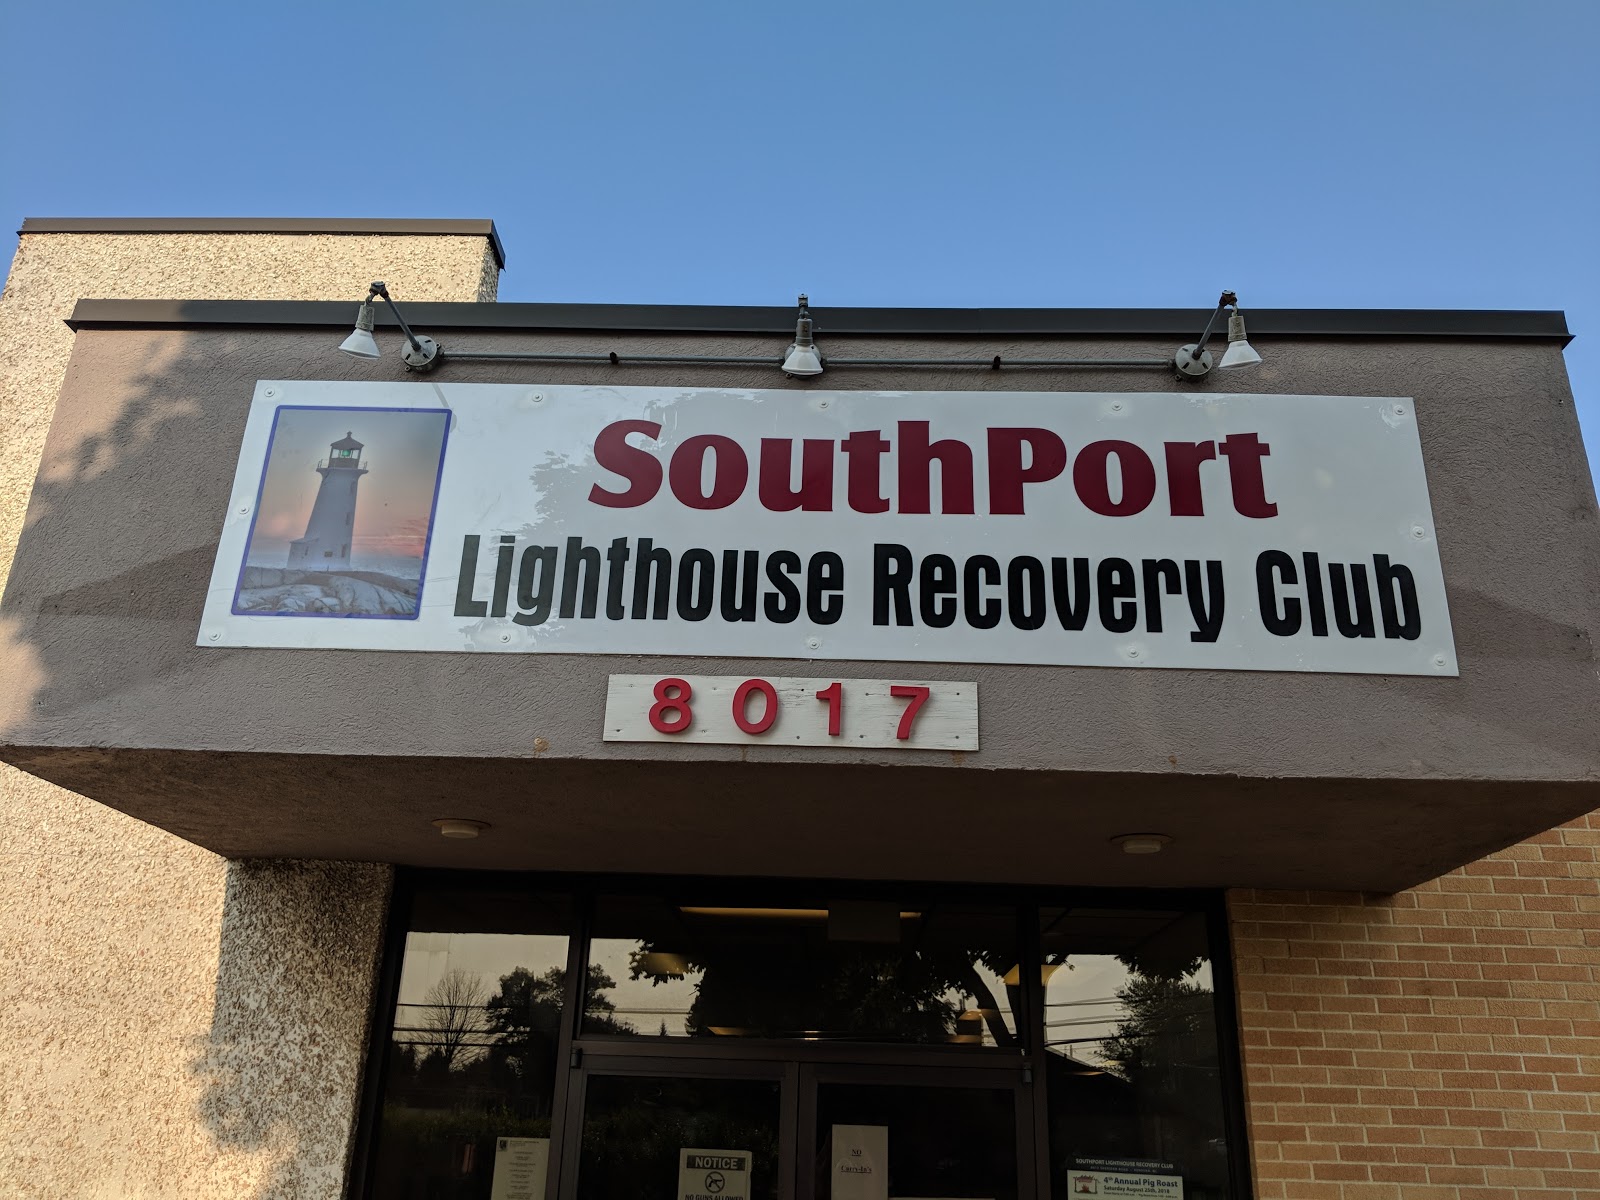 Southport Lighthouse Recovery Club